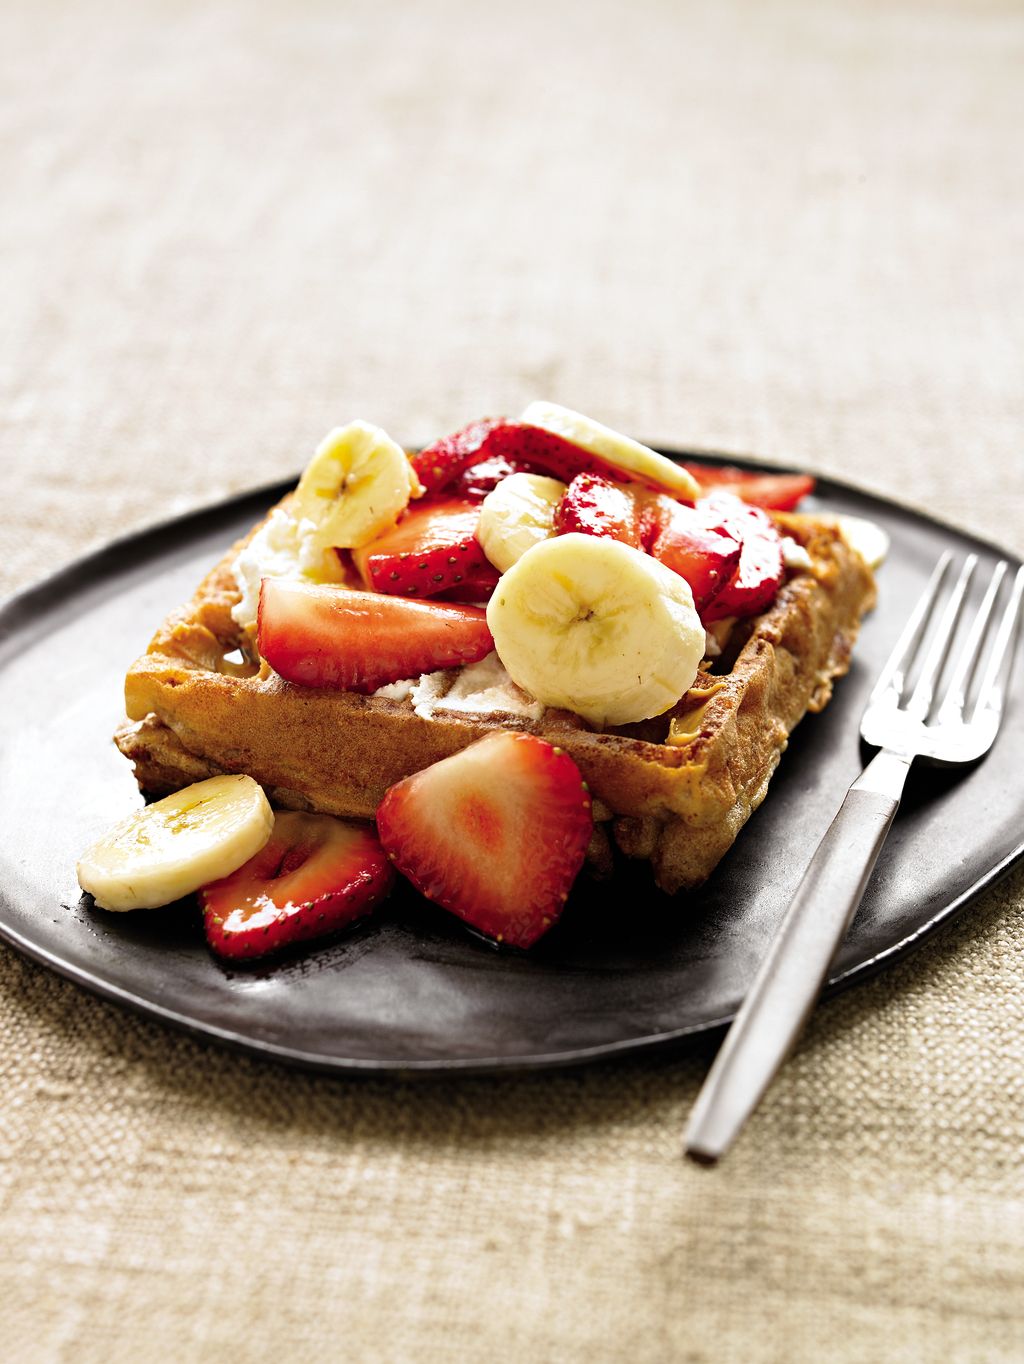 https://hips.hearstapps.com/hmg-prod/images/recipe/waffle-sandwich-with-banana-and-strawberries-1468432827.jpg